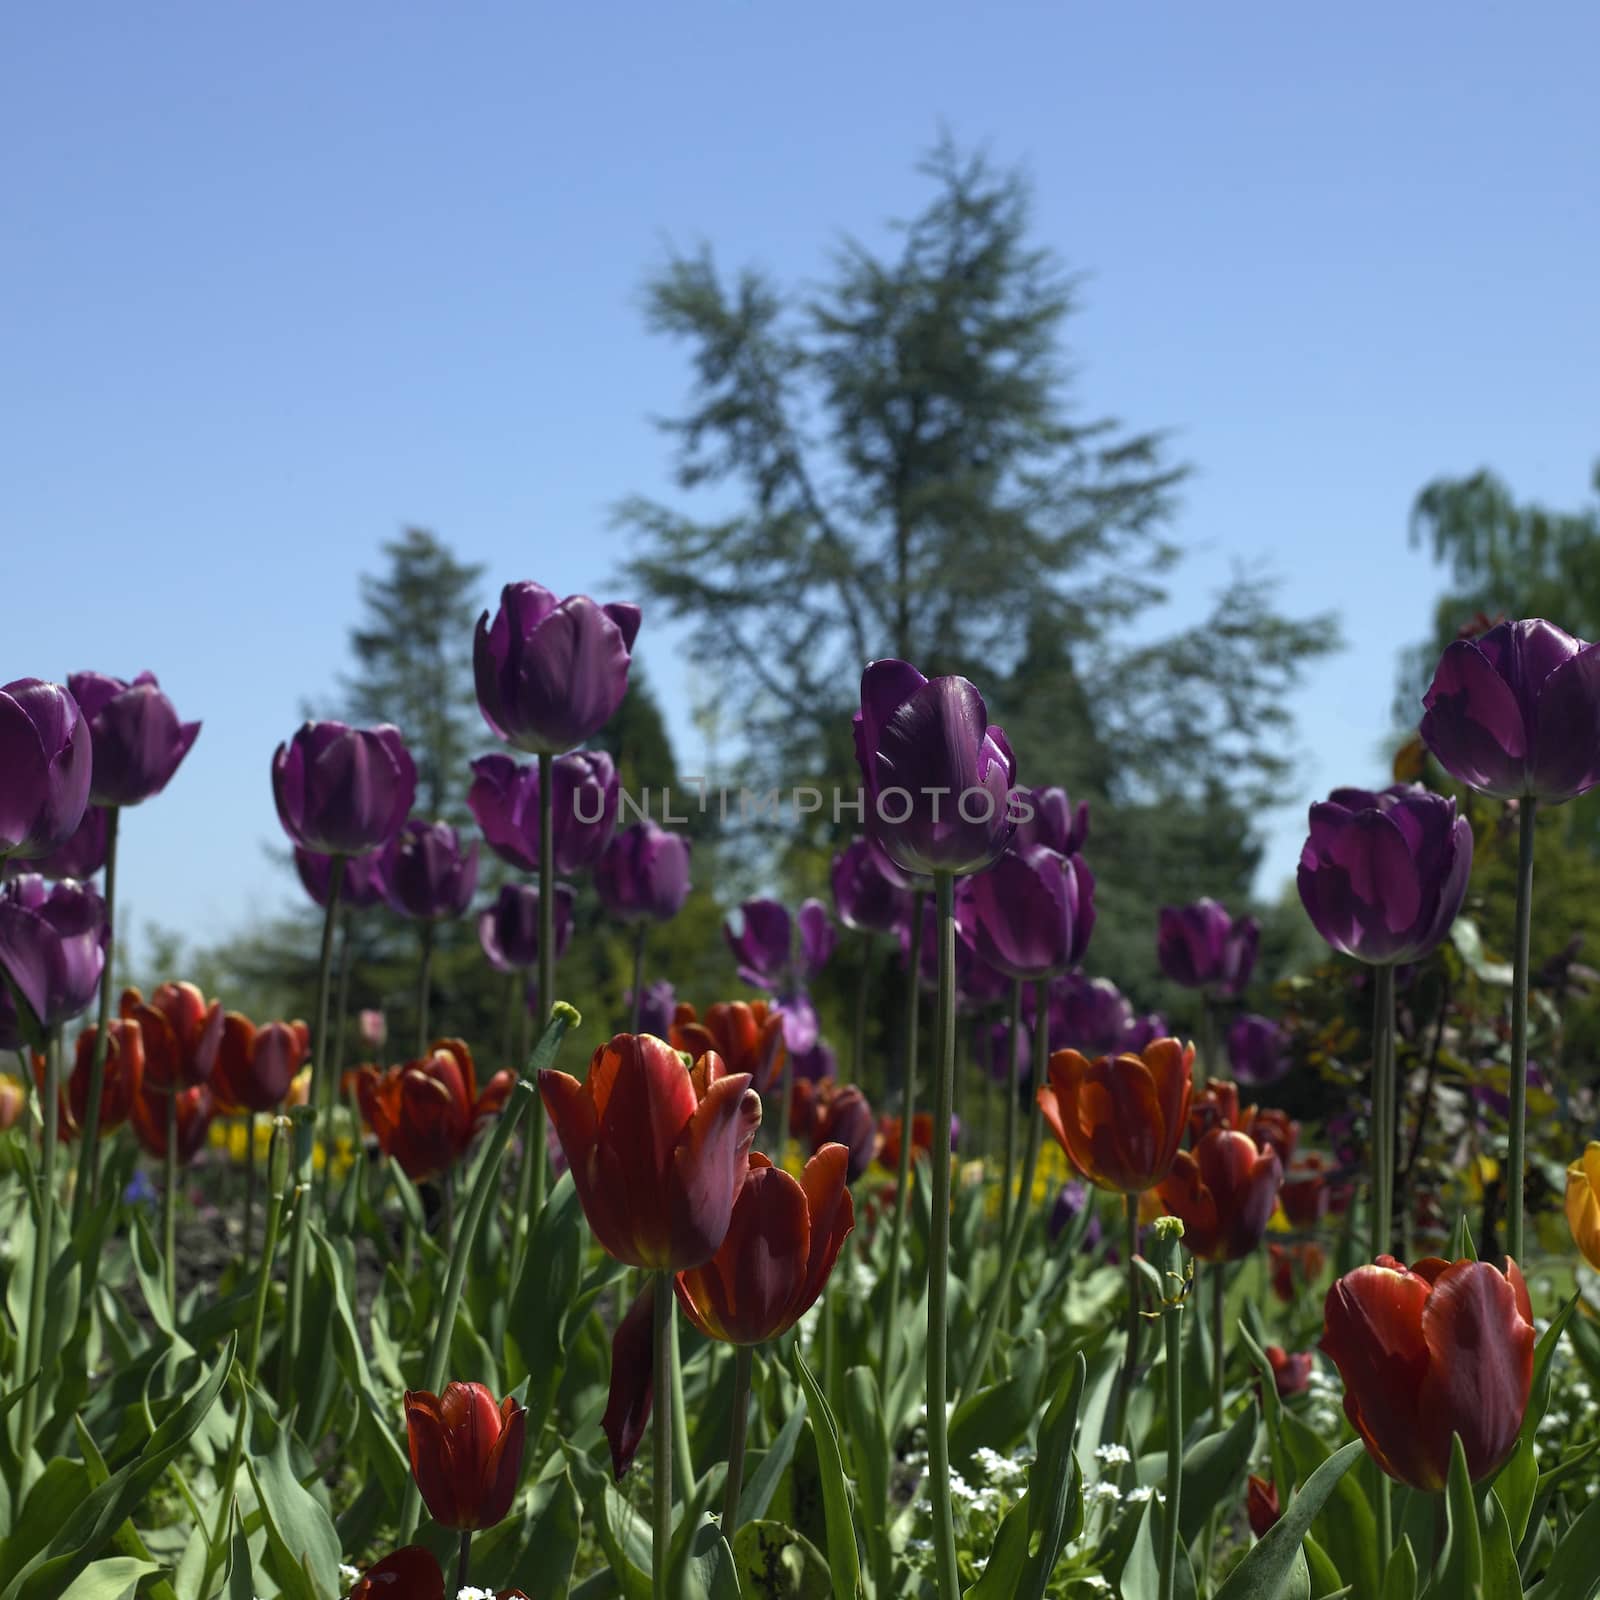 Red and purple tulips in a field